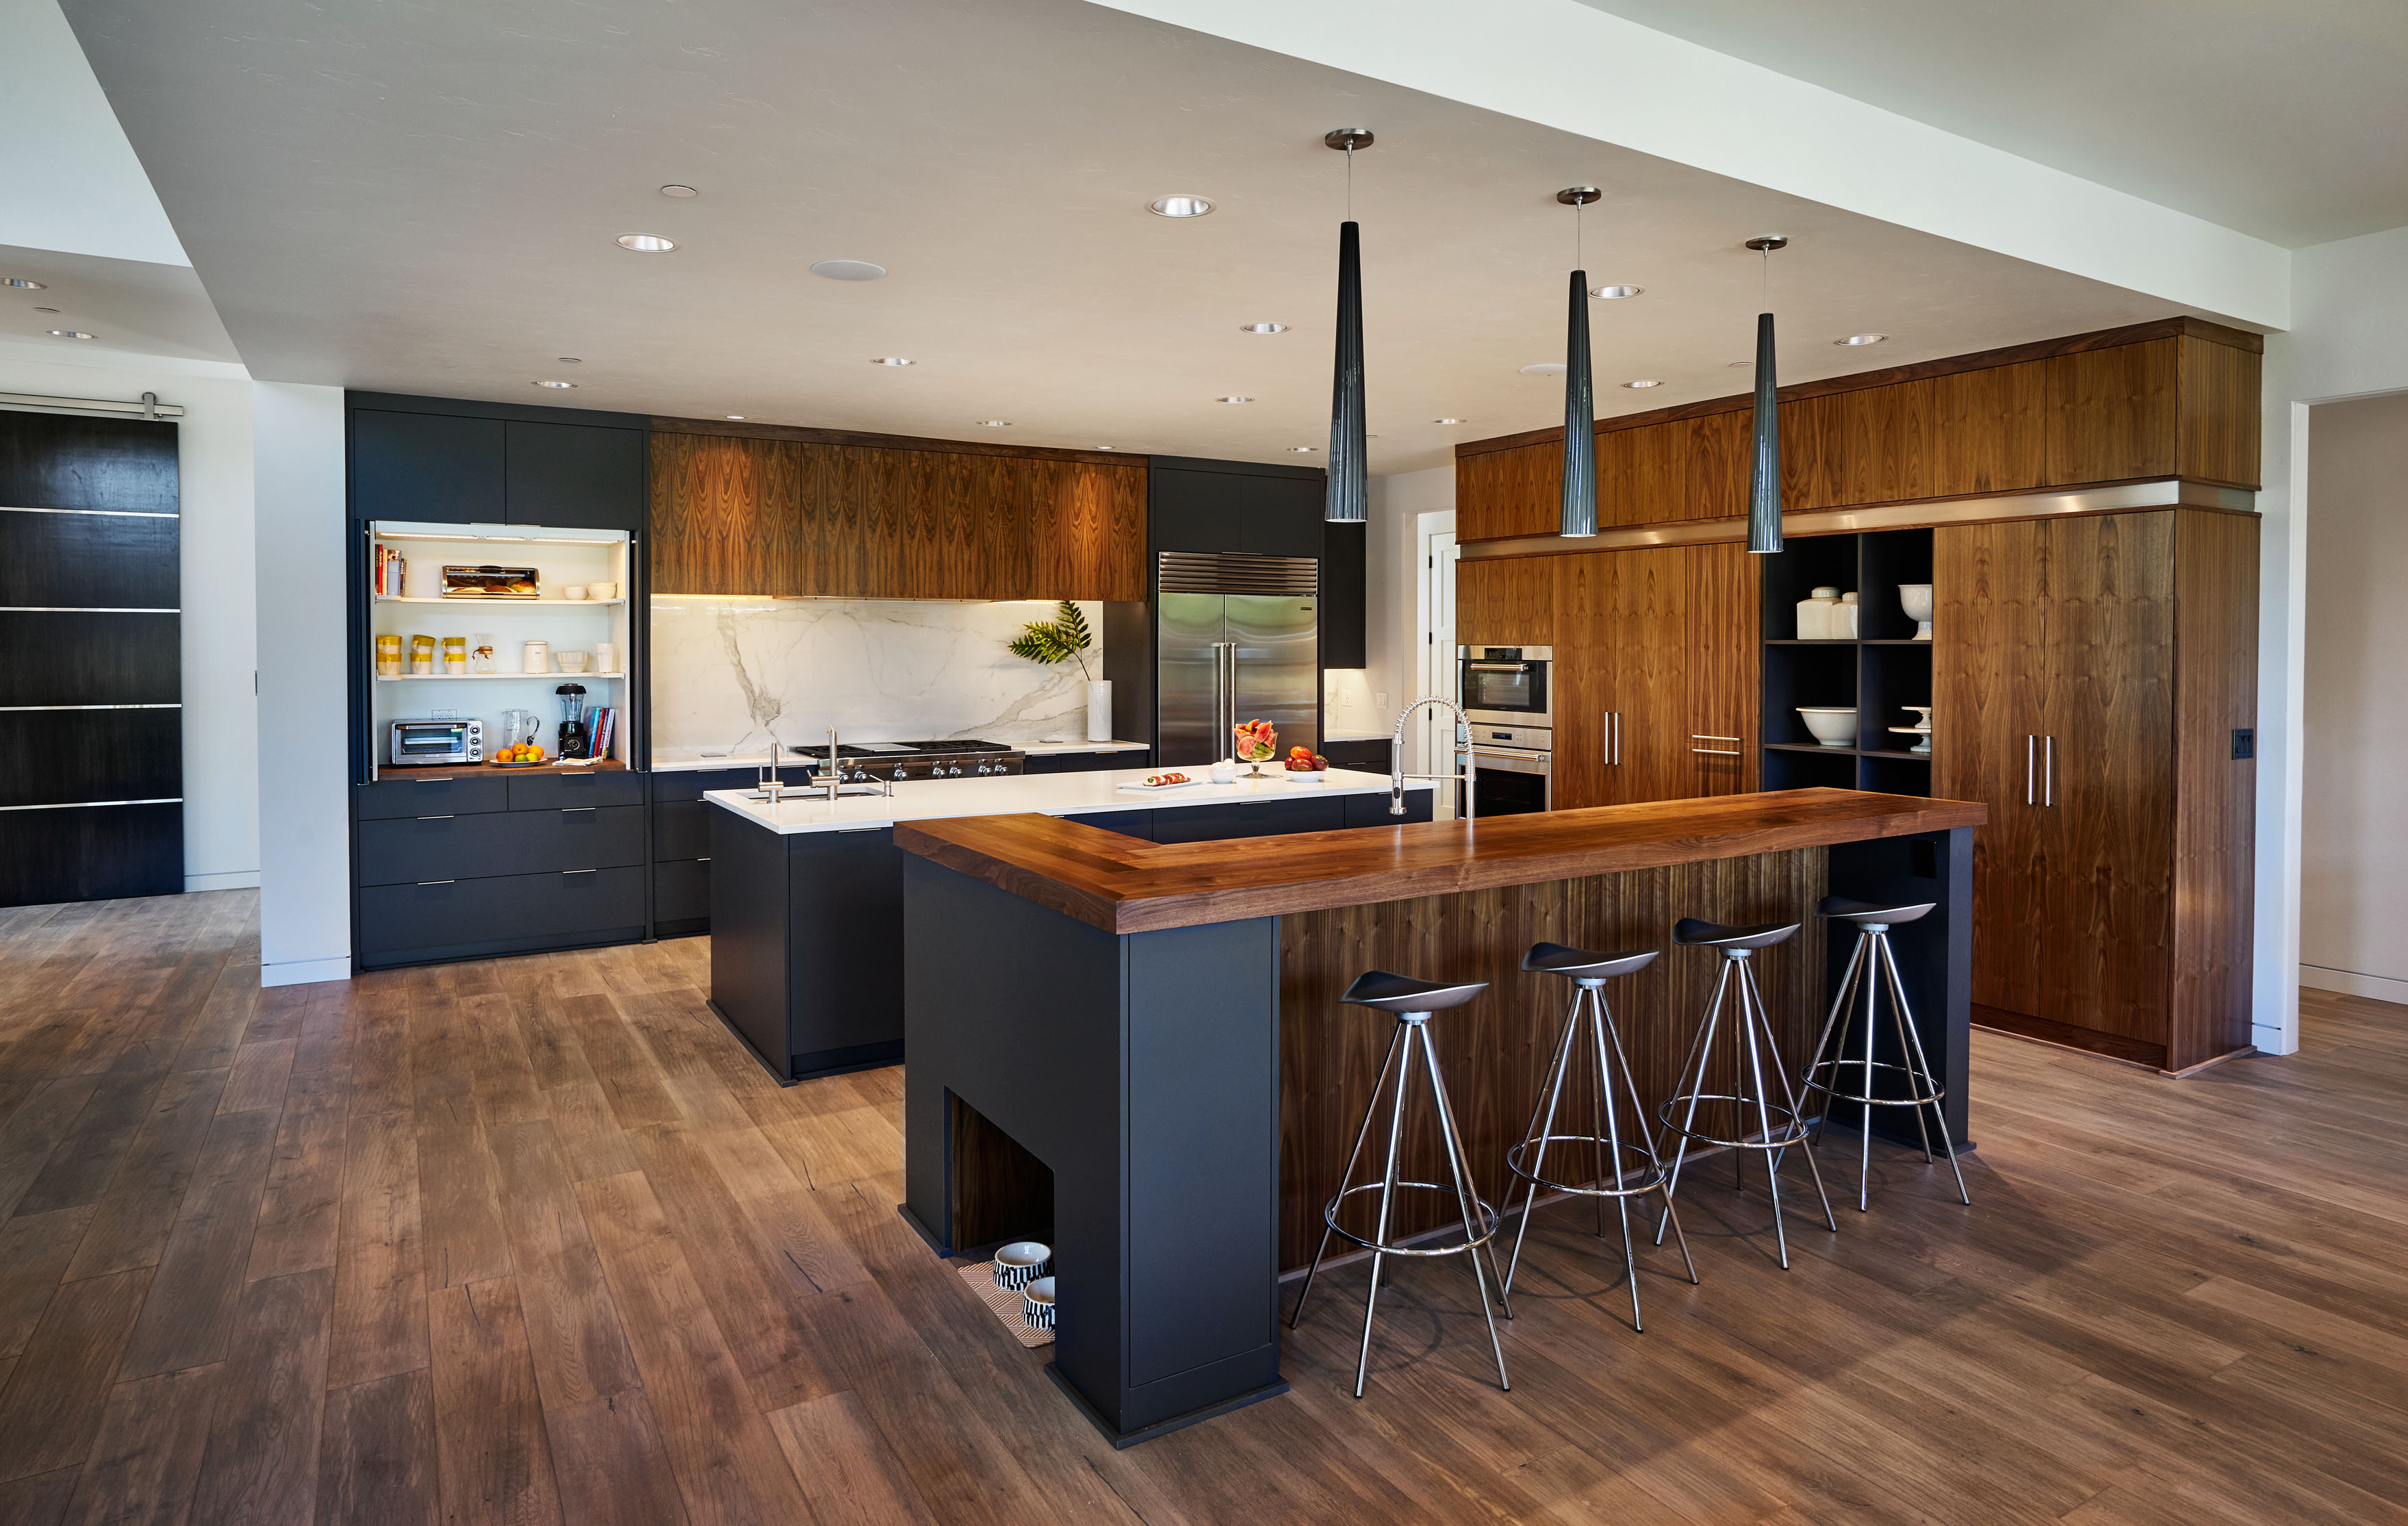 Interior Design Firm Refuses to Design a Typical Kitchen